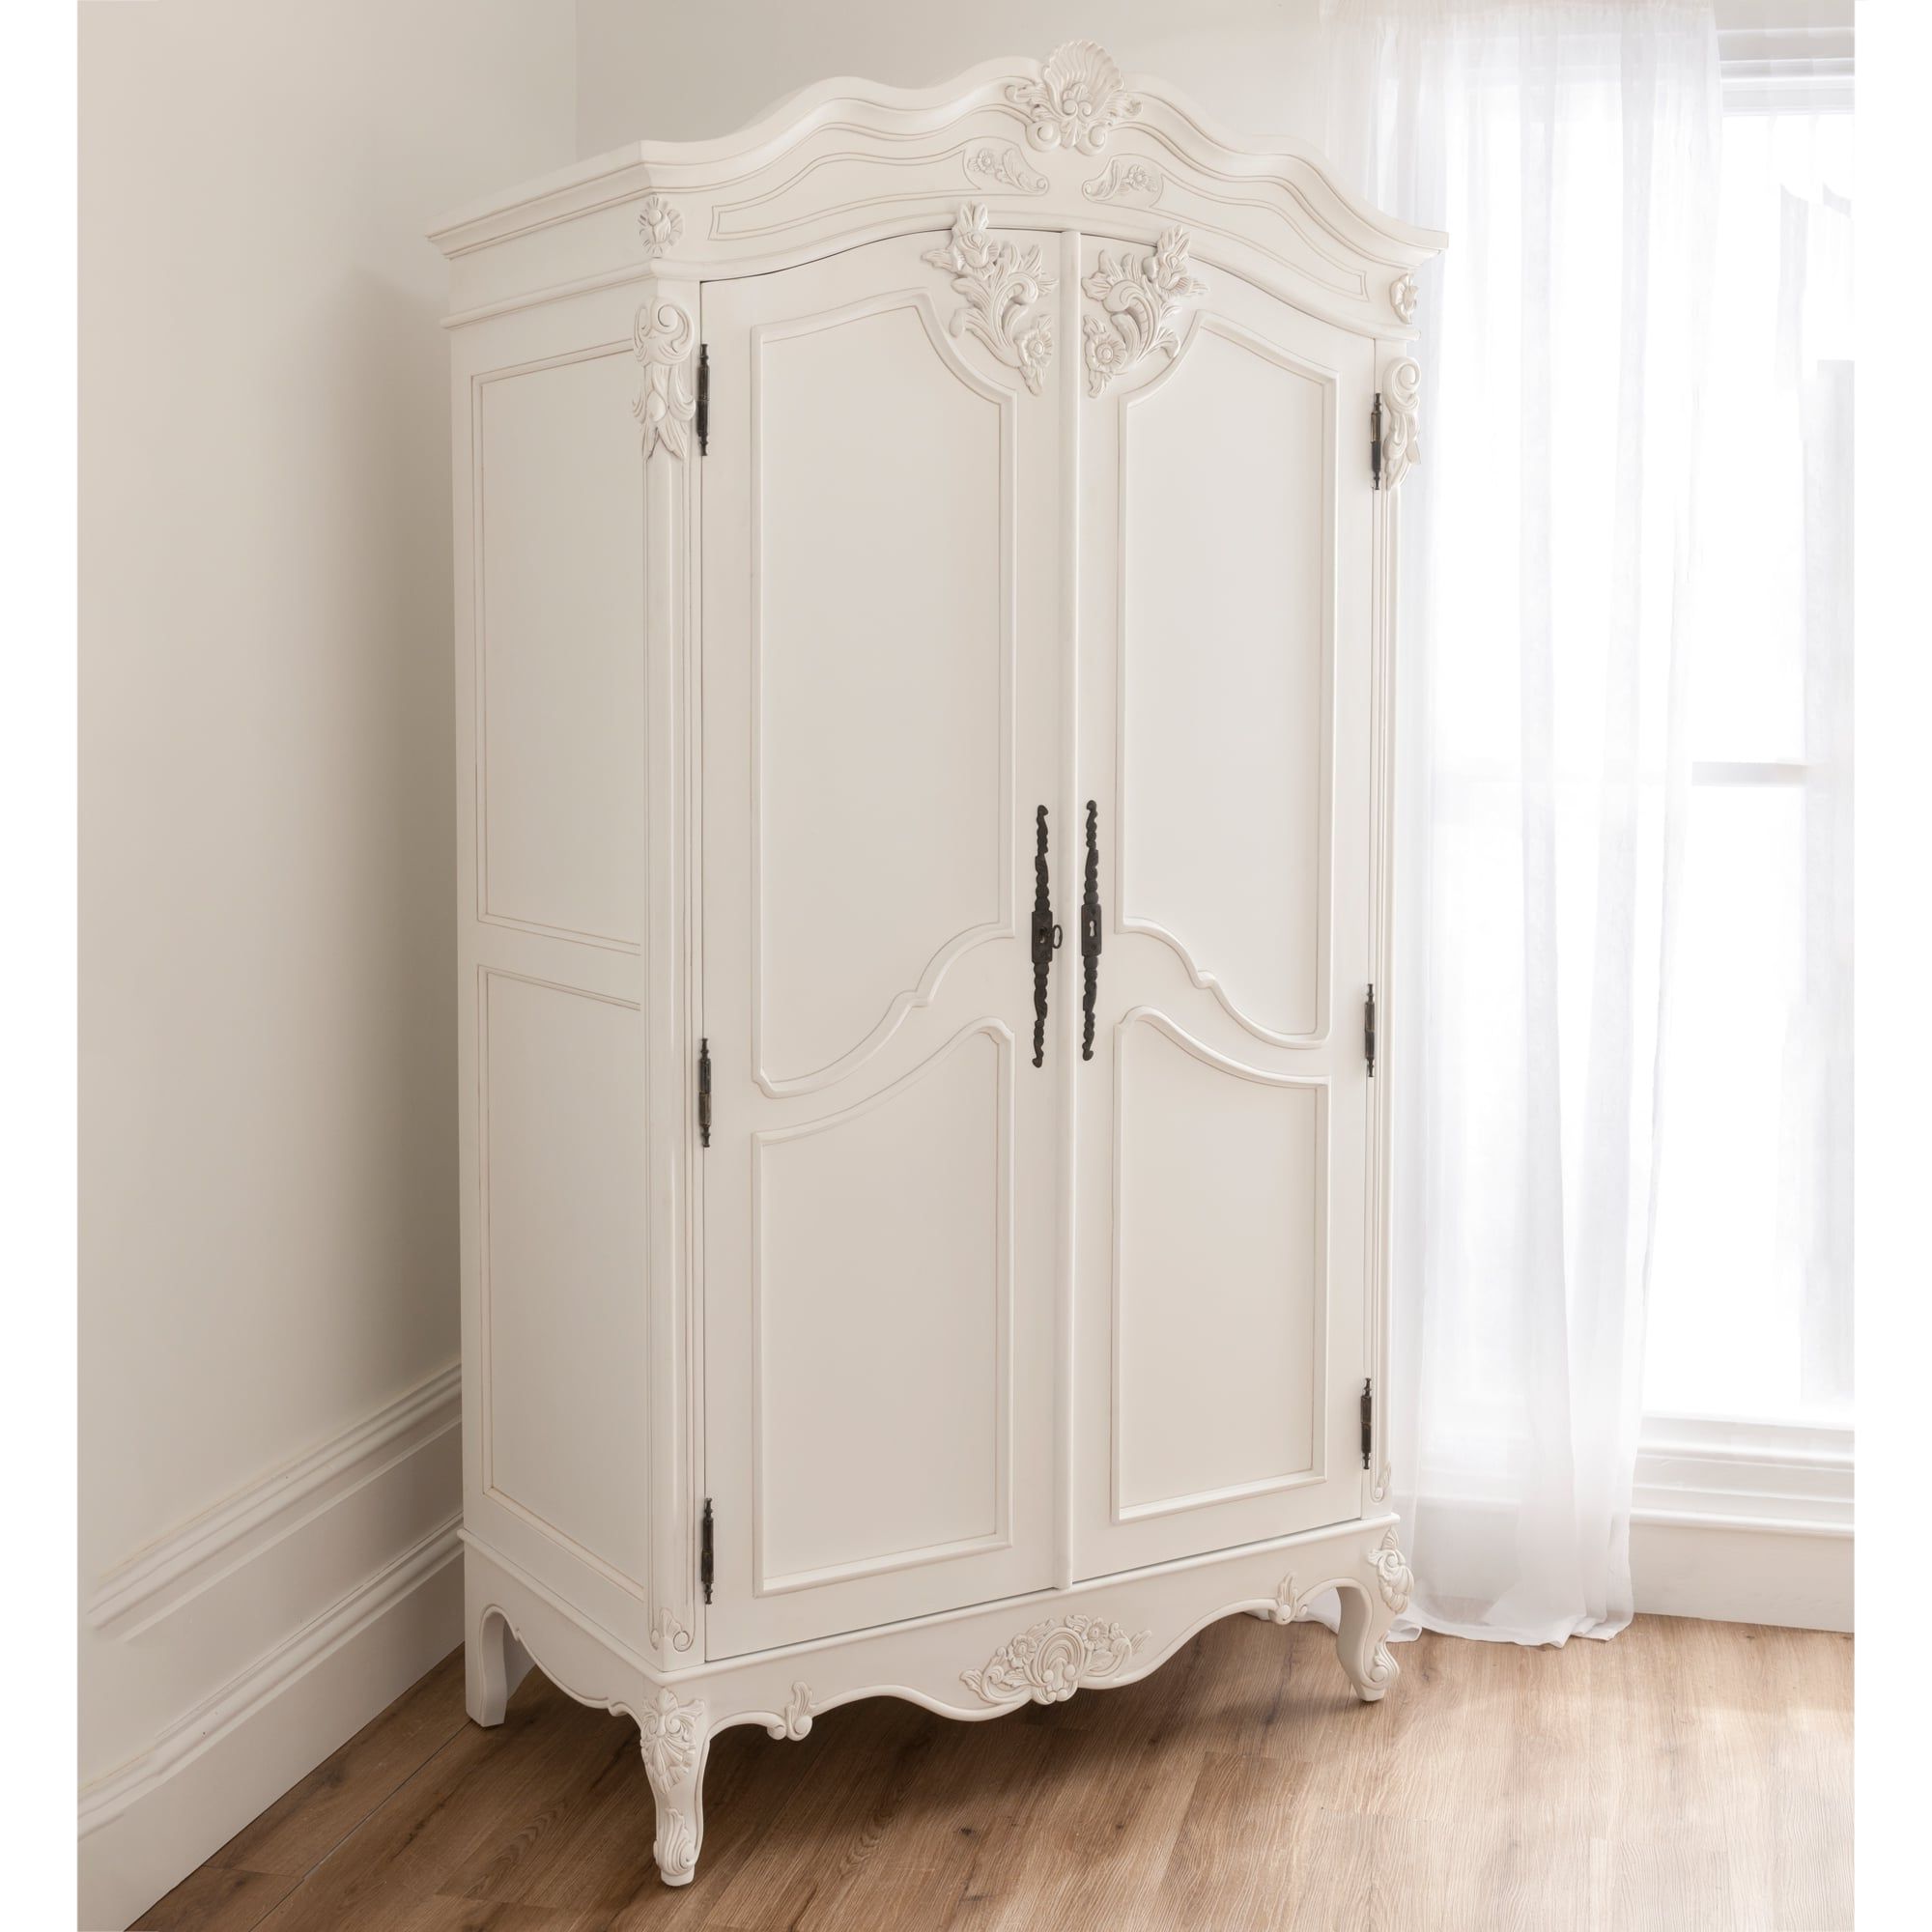 Baroque Antique French Wardrobe Is Available Online At Homesdirect365 Intended For French Wardrobes (Gallery 2 of 20)